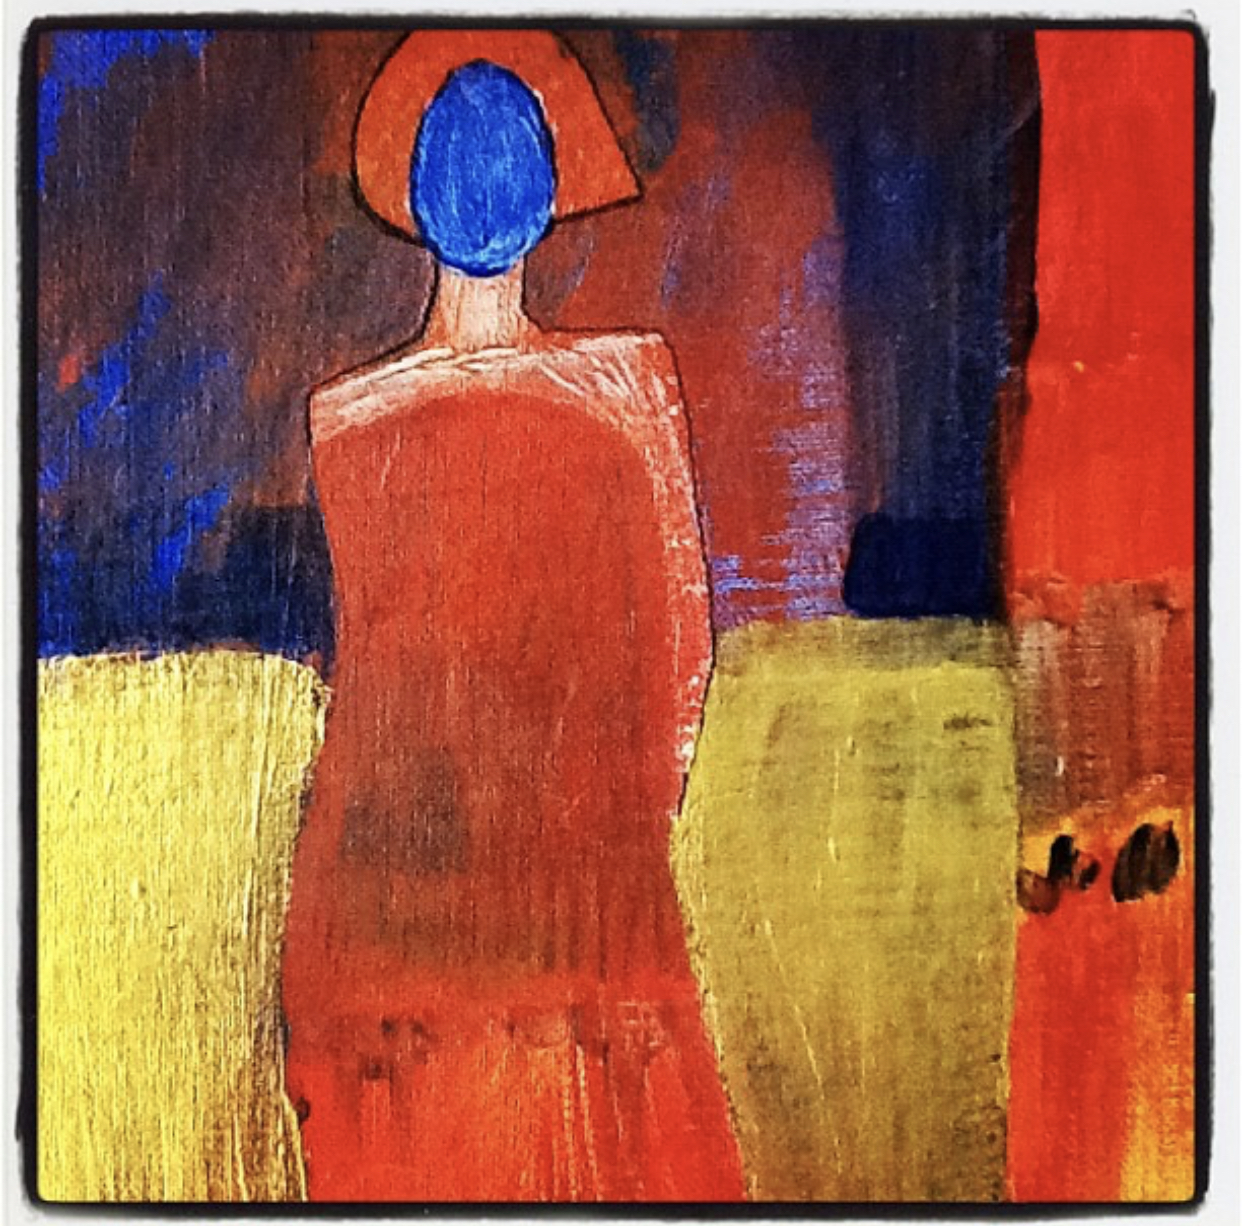 A red yellow and blue painting of the figure of a faceless woman